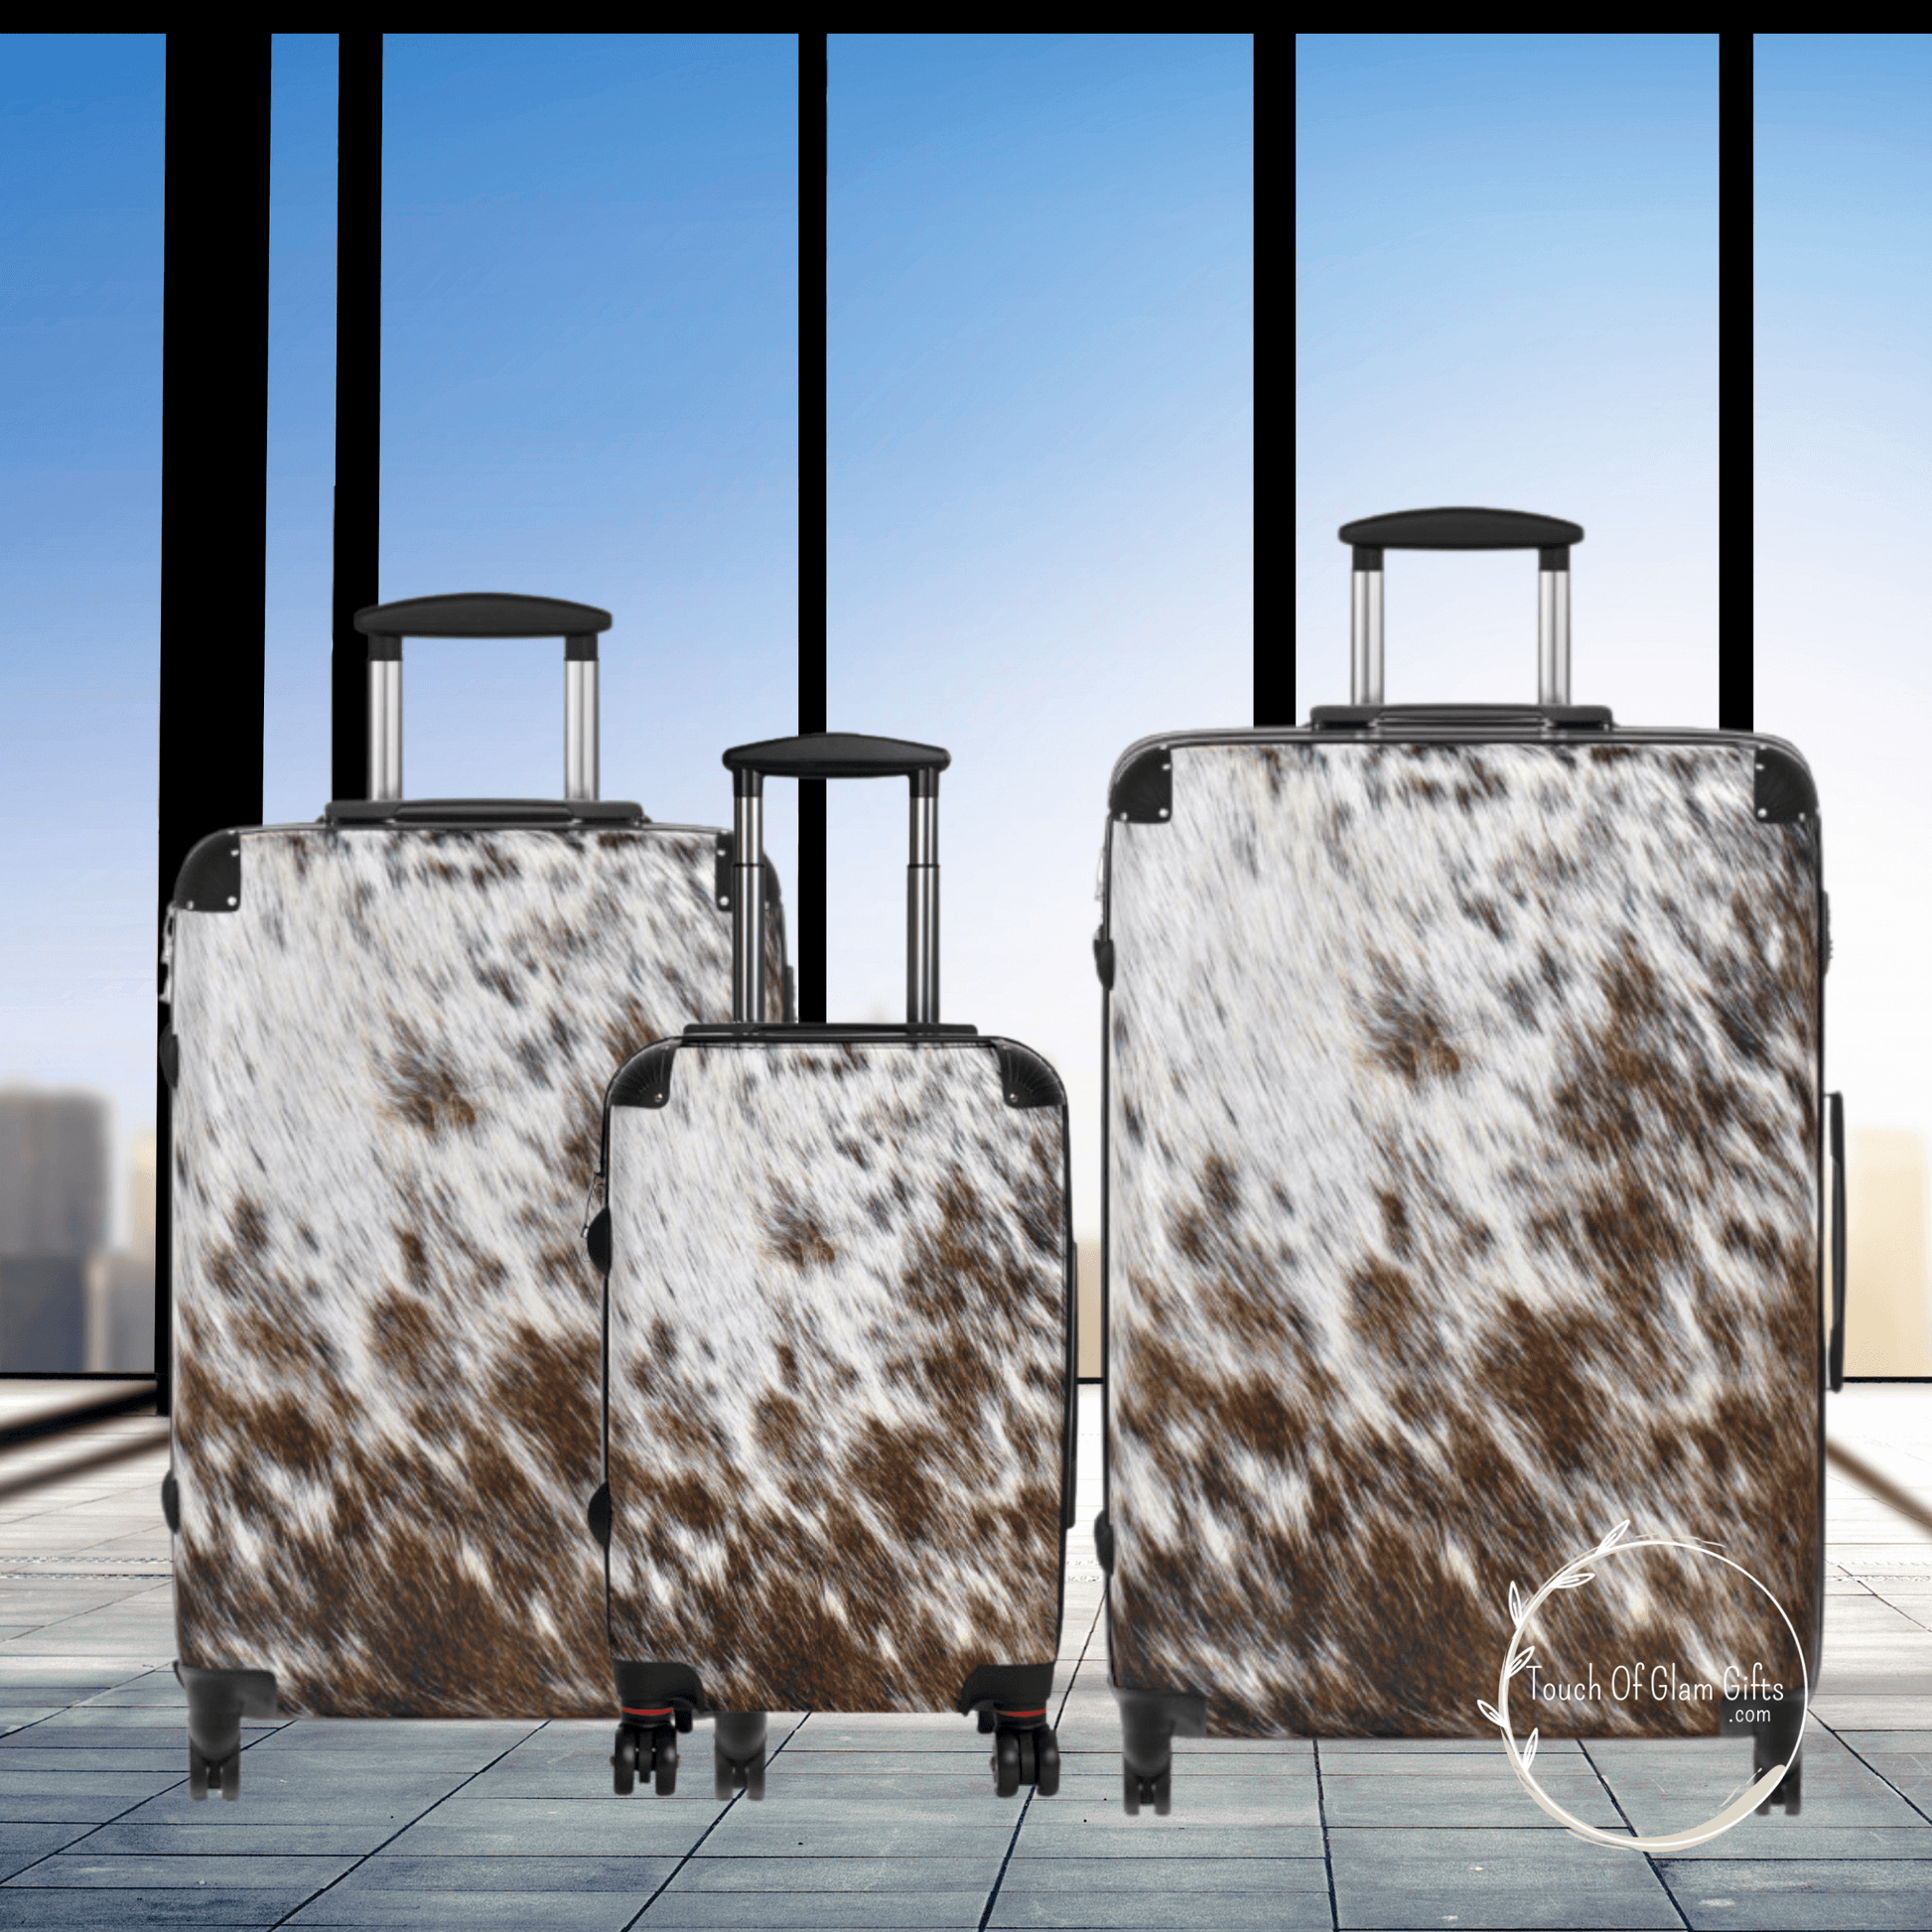 Our beautiful 3 piece cowhide luggage set shown in an airport with a glass window and blue sky background. The luggage pieces have 360 rotating wheels.